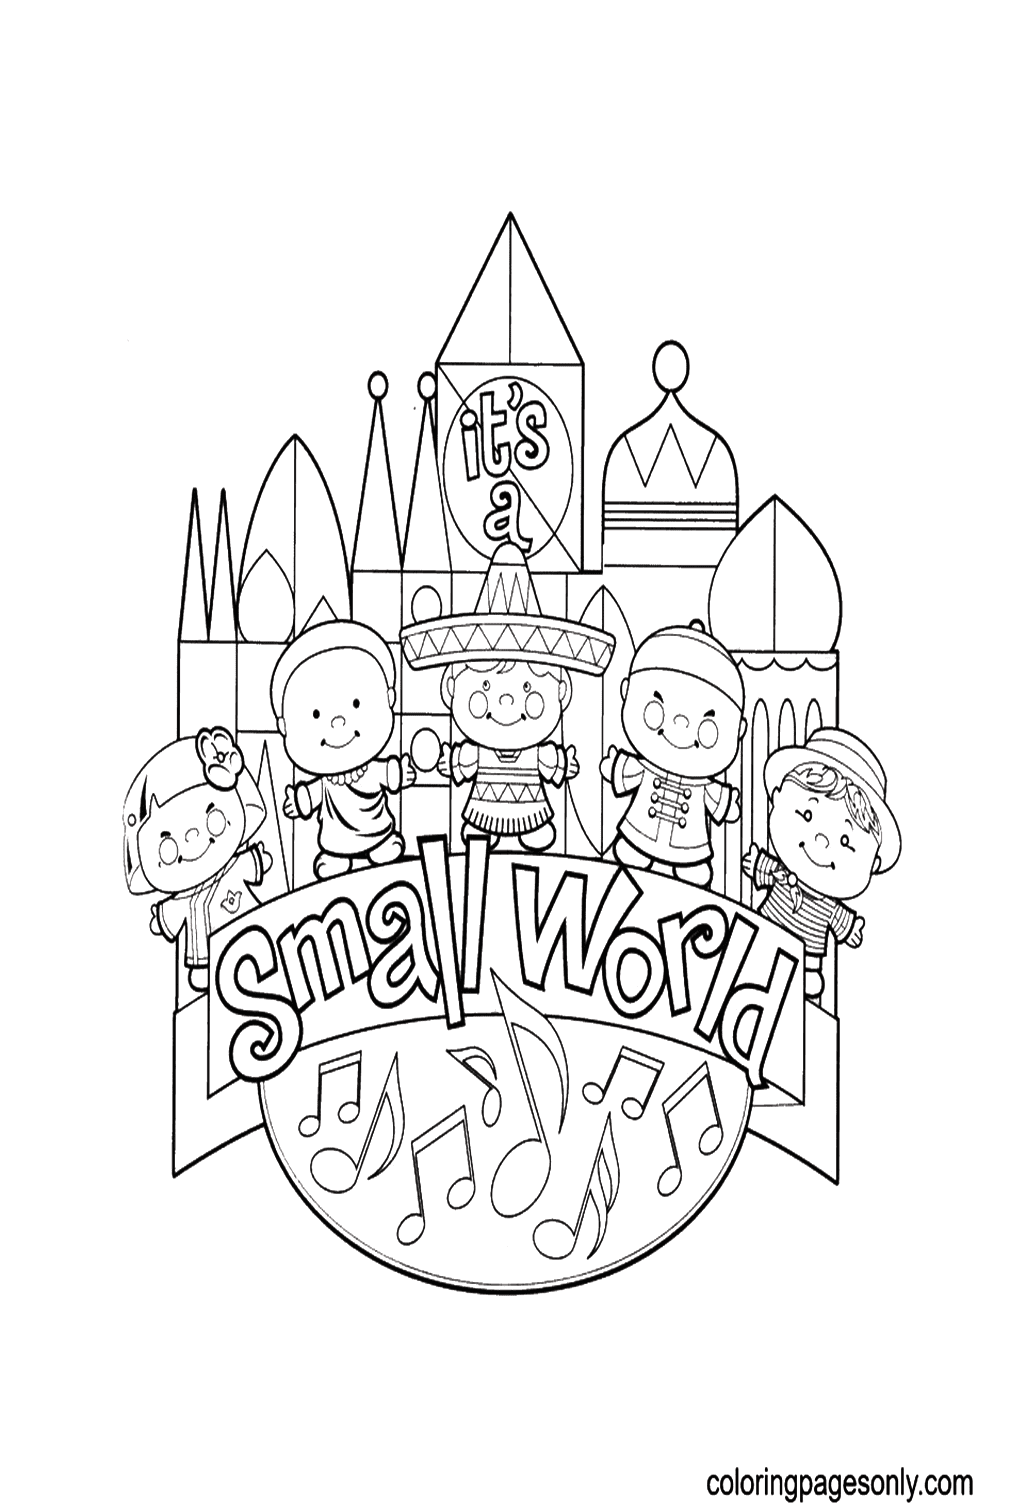 Small World Coloring Page